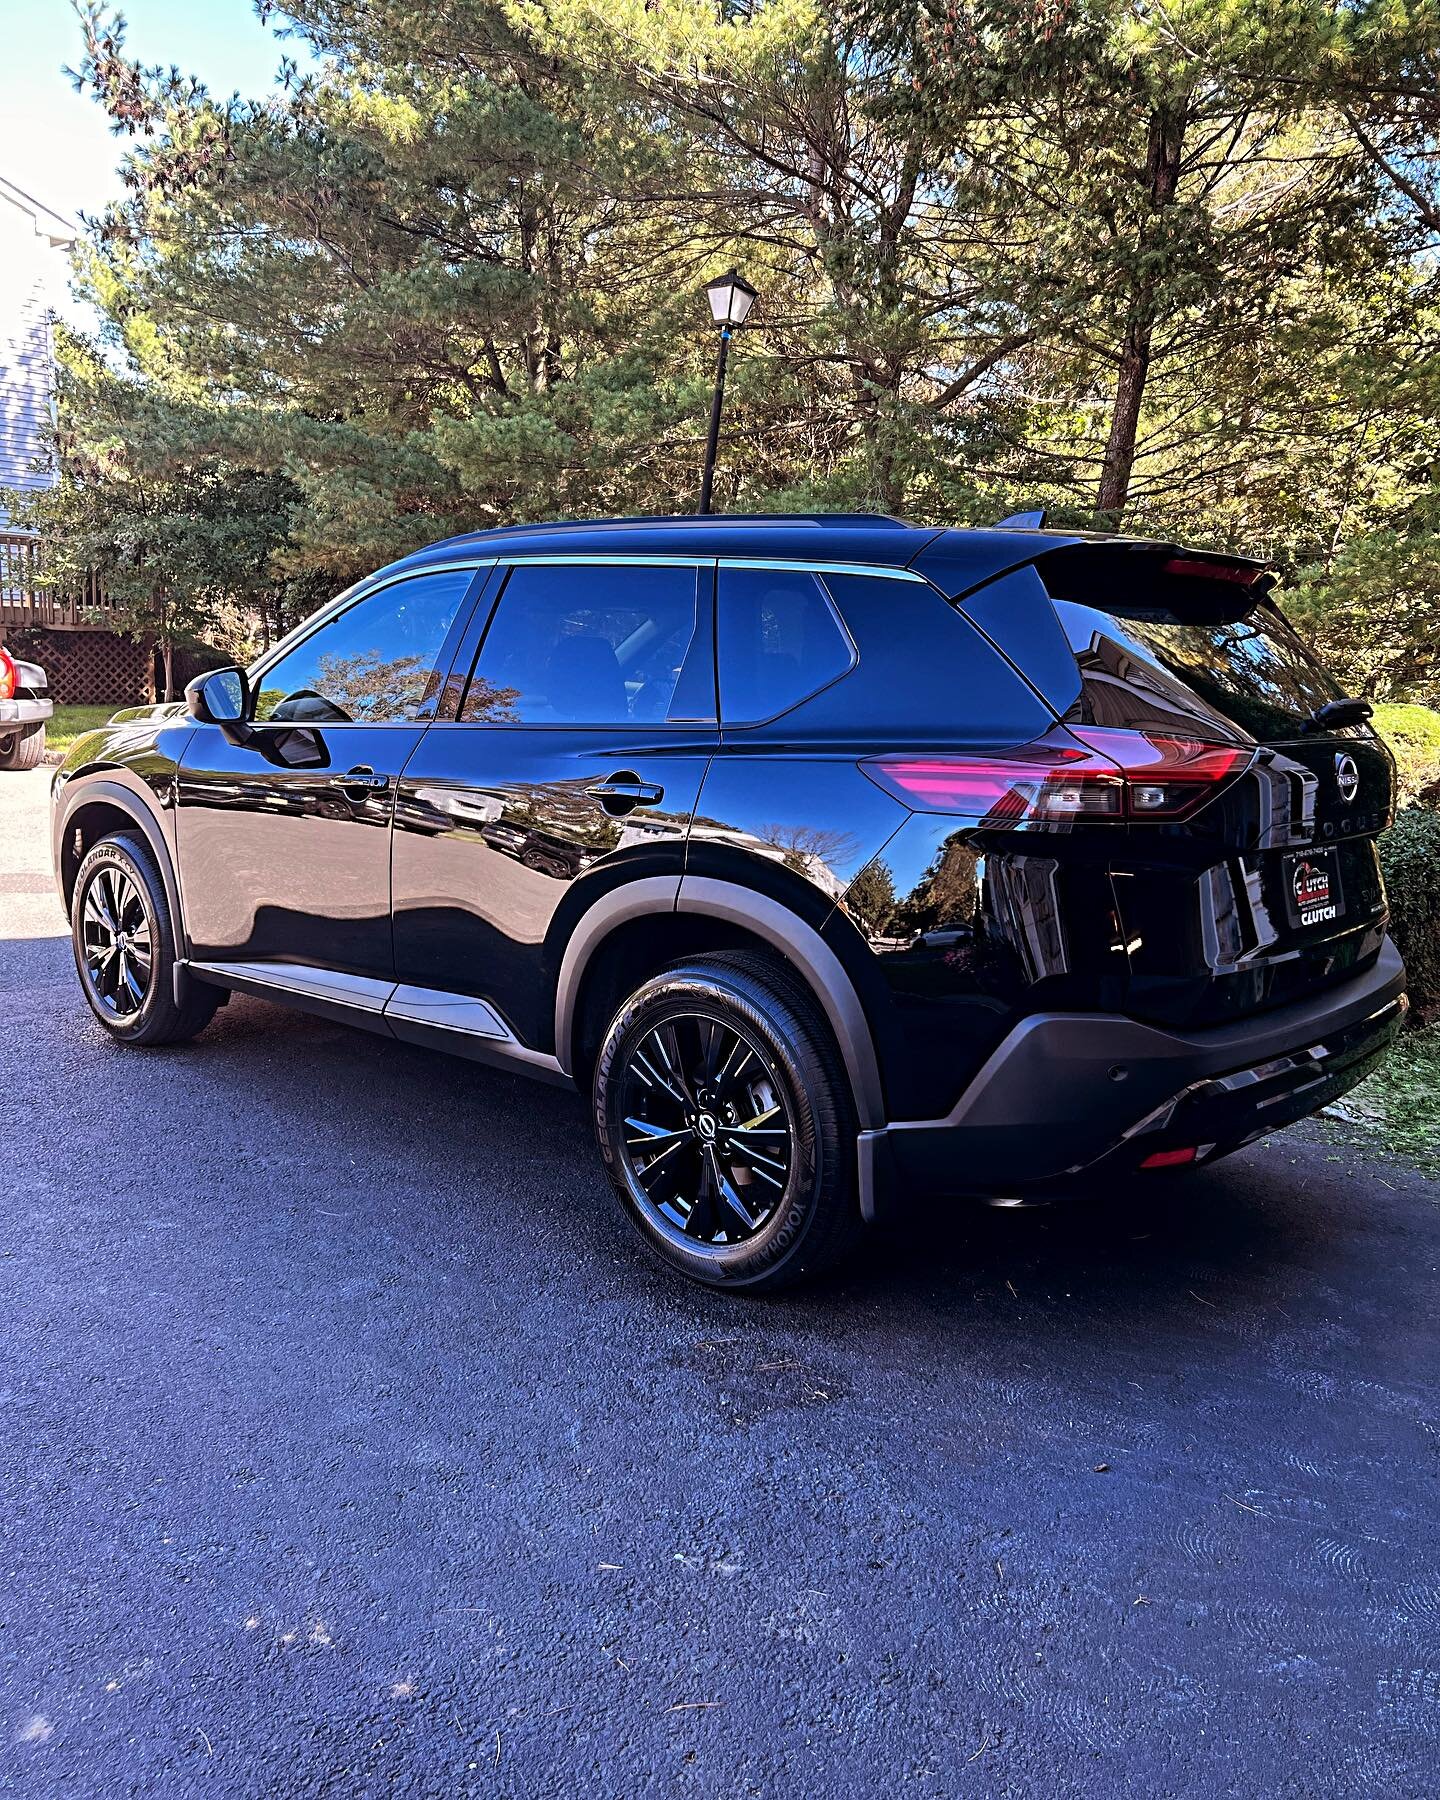 2023 NISSAN ROGUE SV PREMIUM WITH MIDNIGHT PACKAGE!

Contact us today 718-676-7406